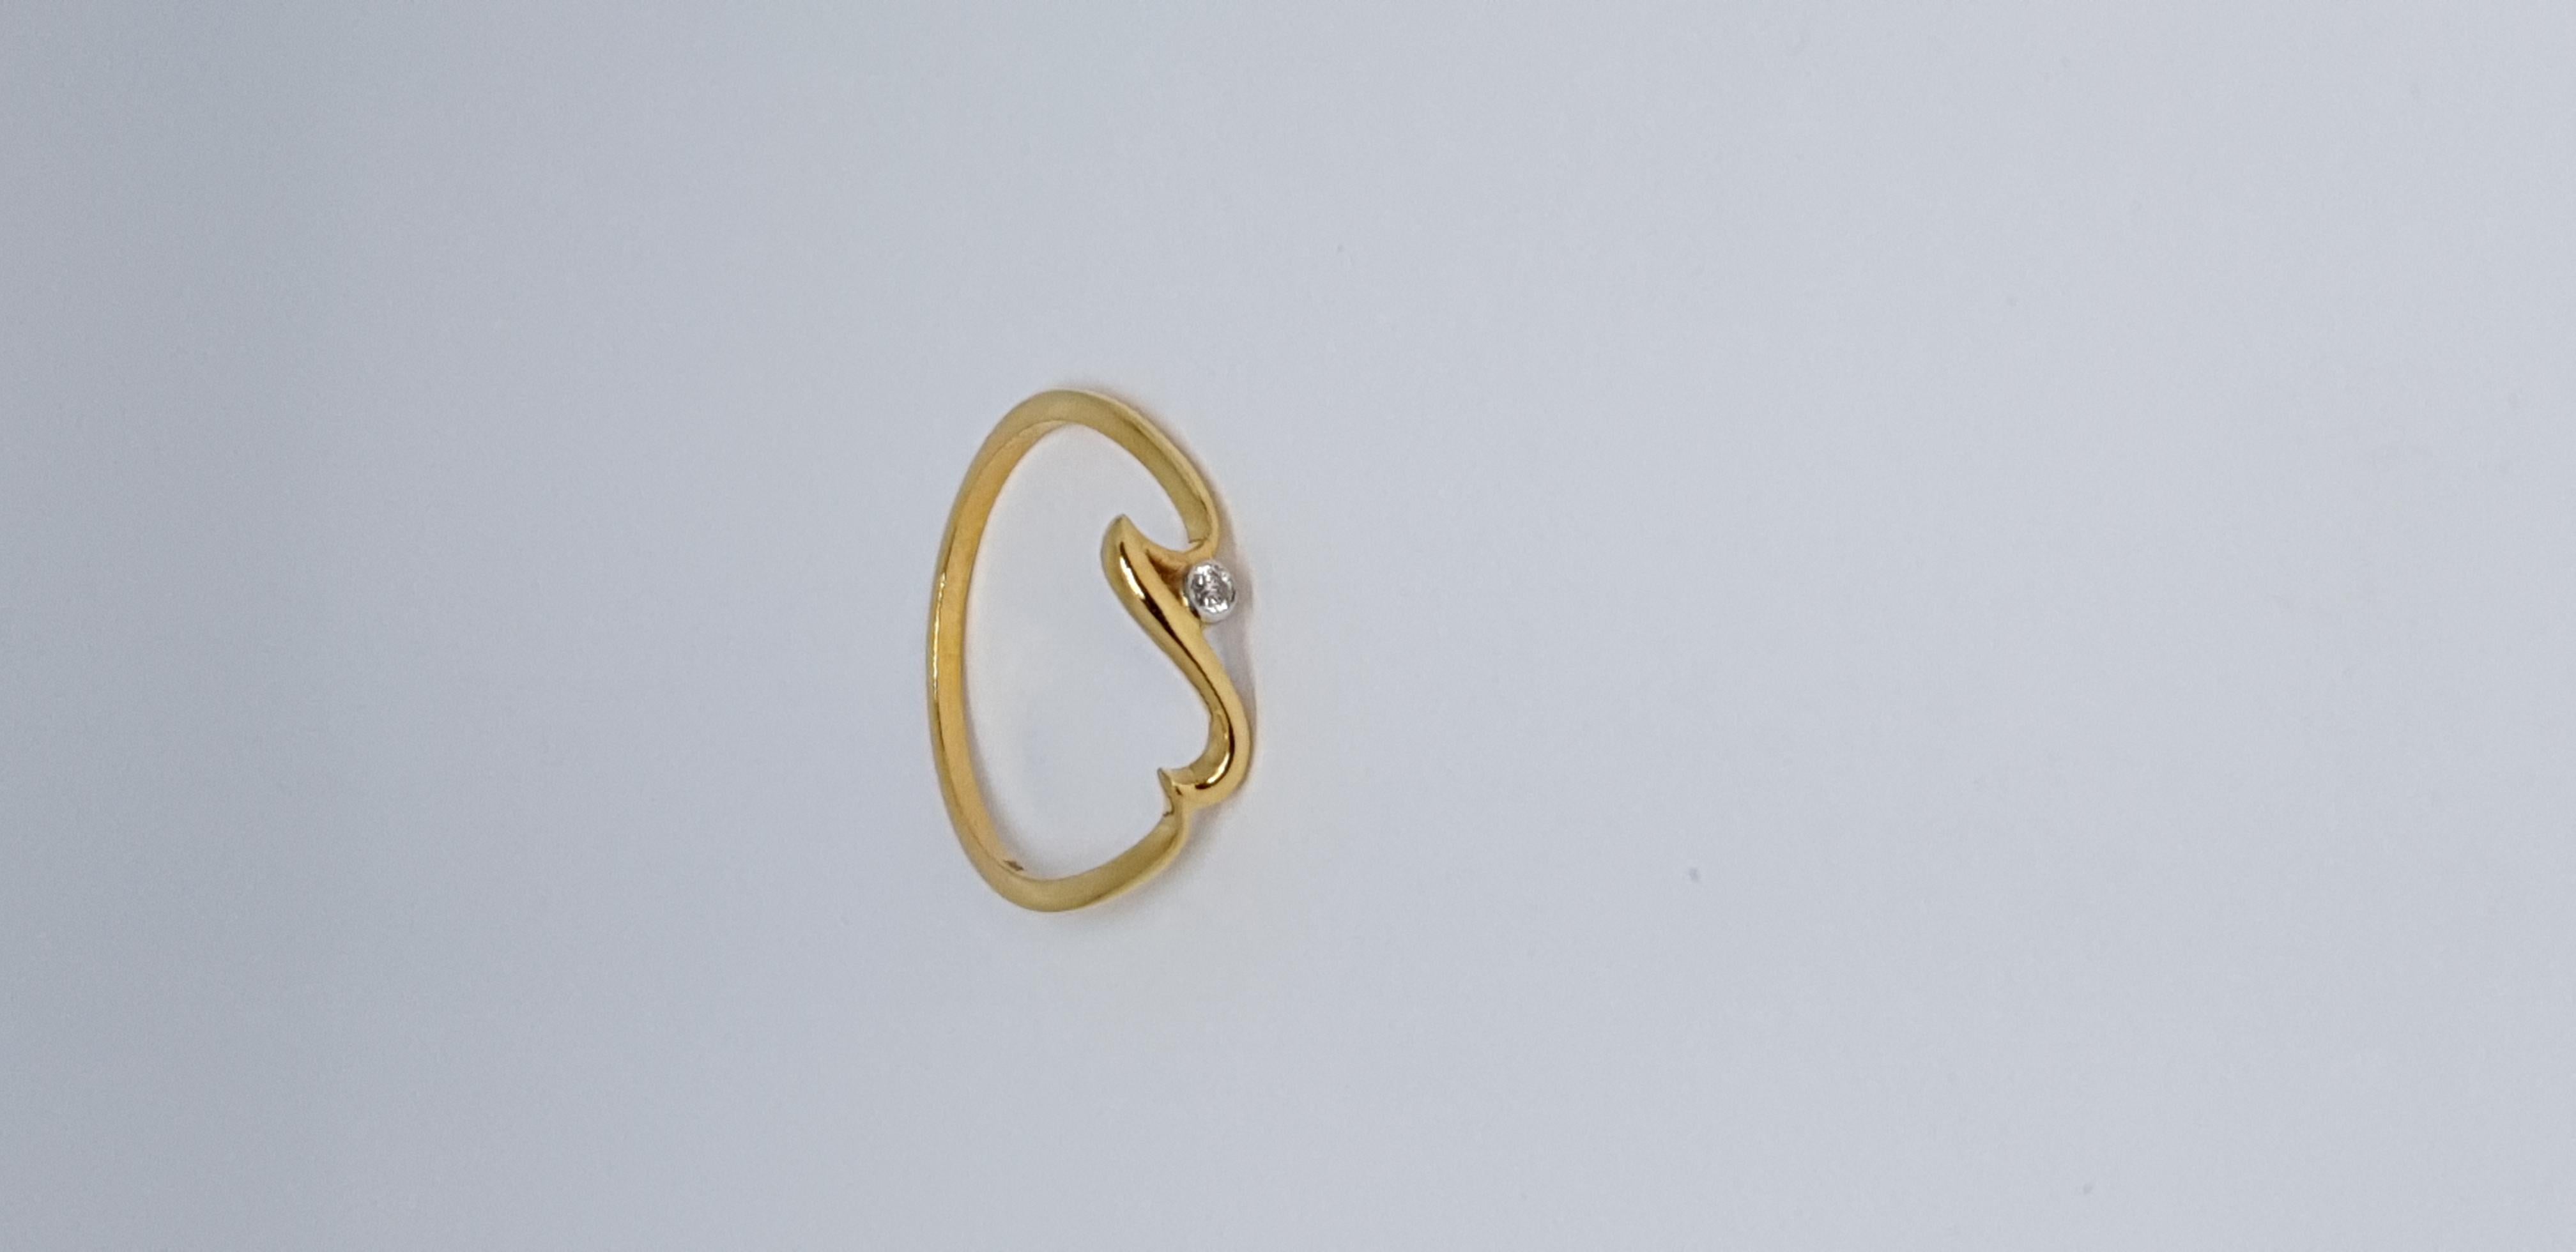 For Sale:  Natural Diamond Wave Ring 14K Solid Gold Dainty Ocean Lover Jewelry Gift. 6